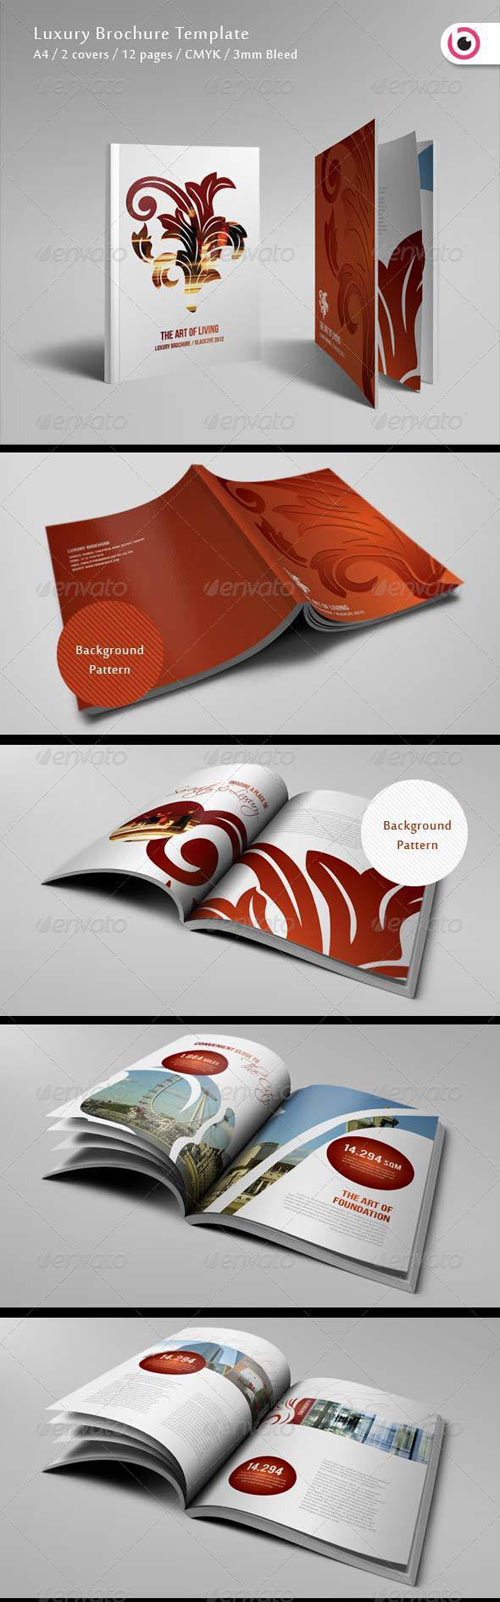 Luxury Brochure Template 12 Pages